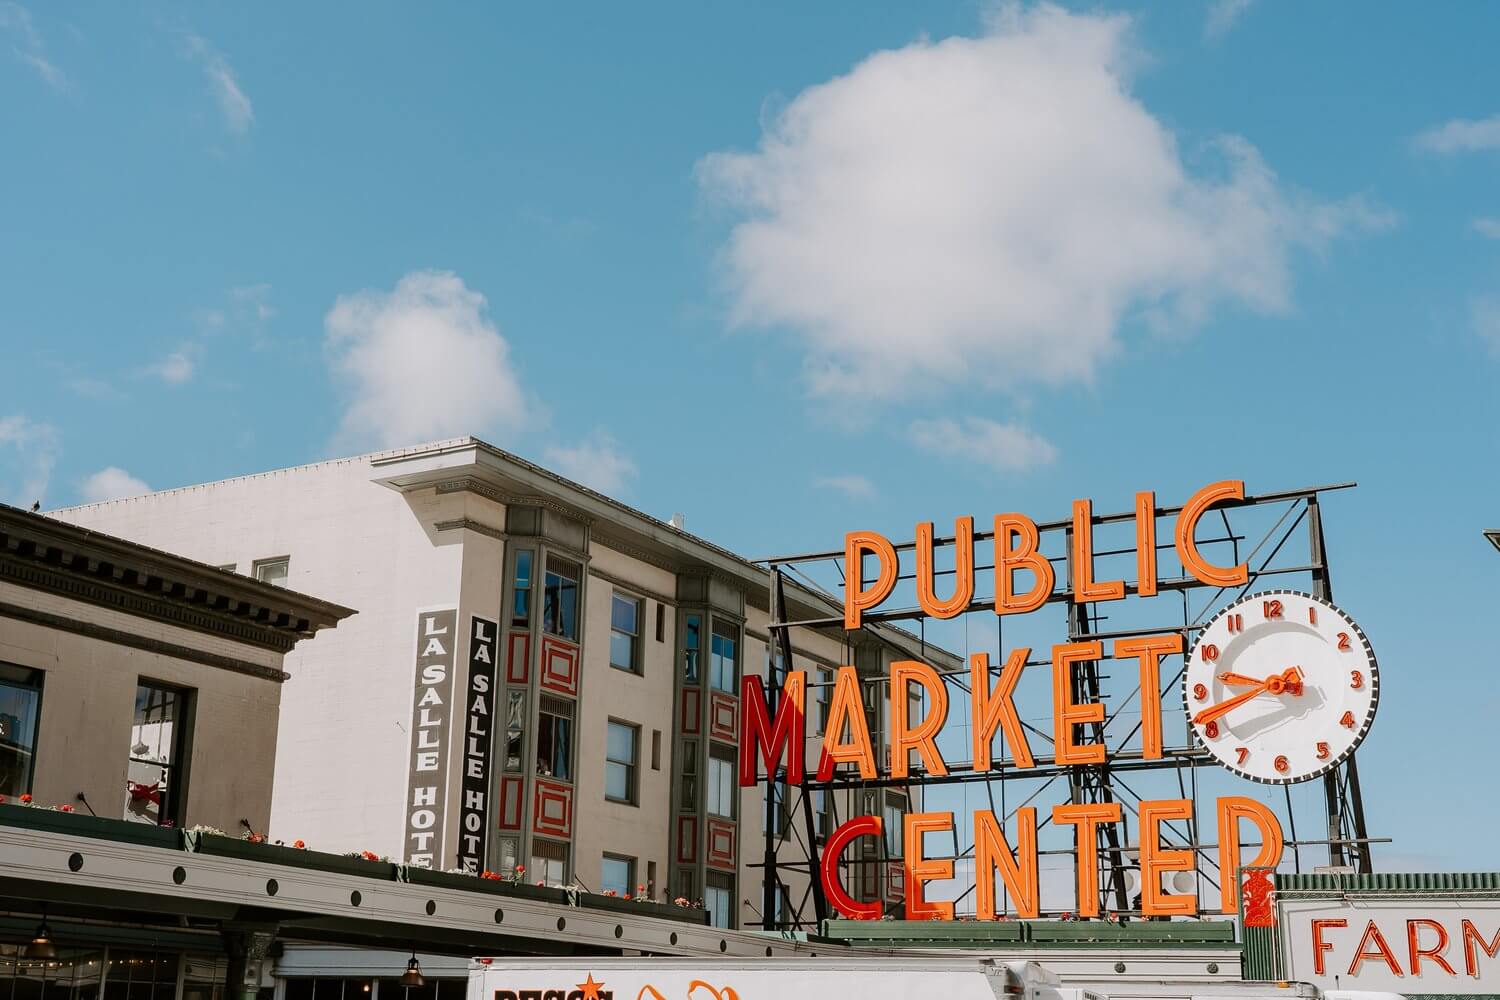 Neon sign at Public Market Center in Seattle